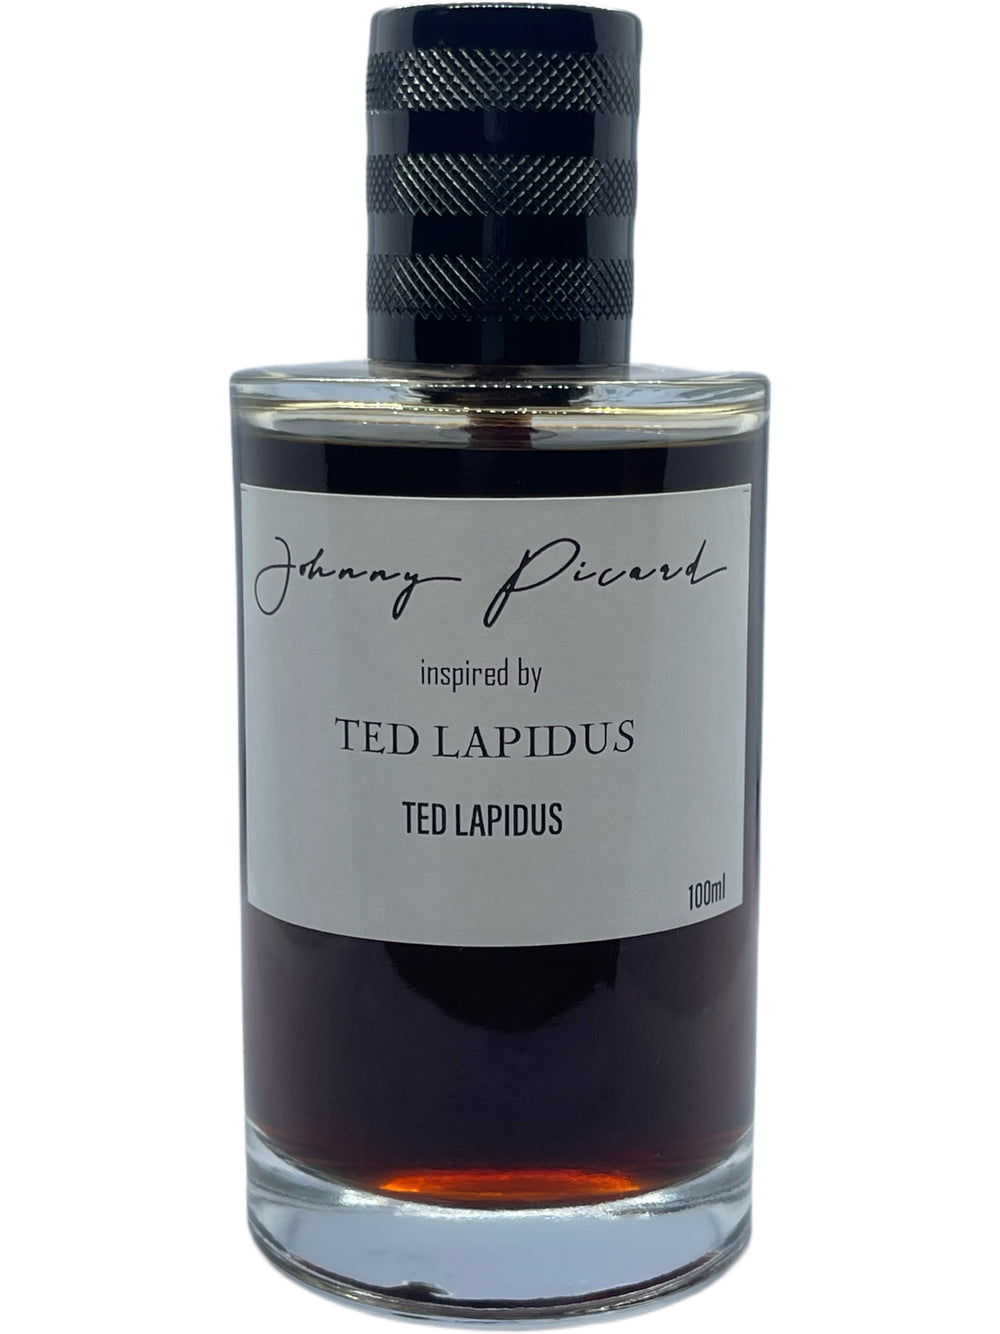 Johnny picard inspired by ted lapidus TED LAPIDUS